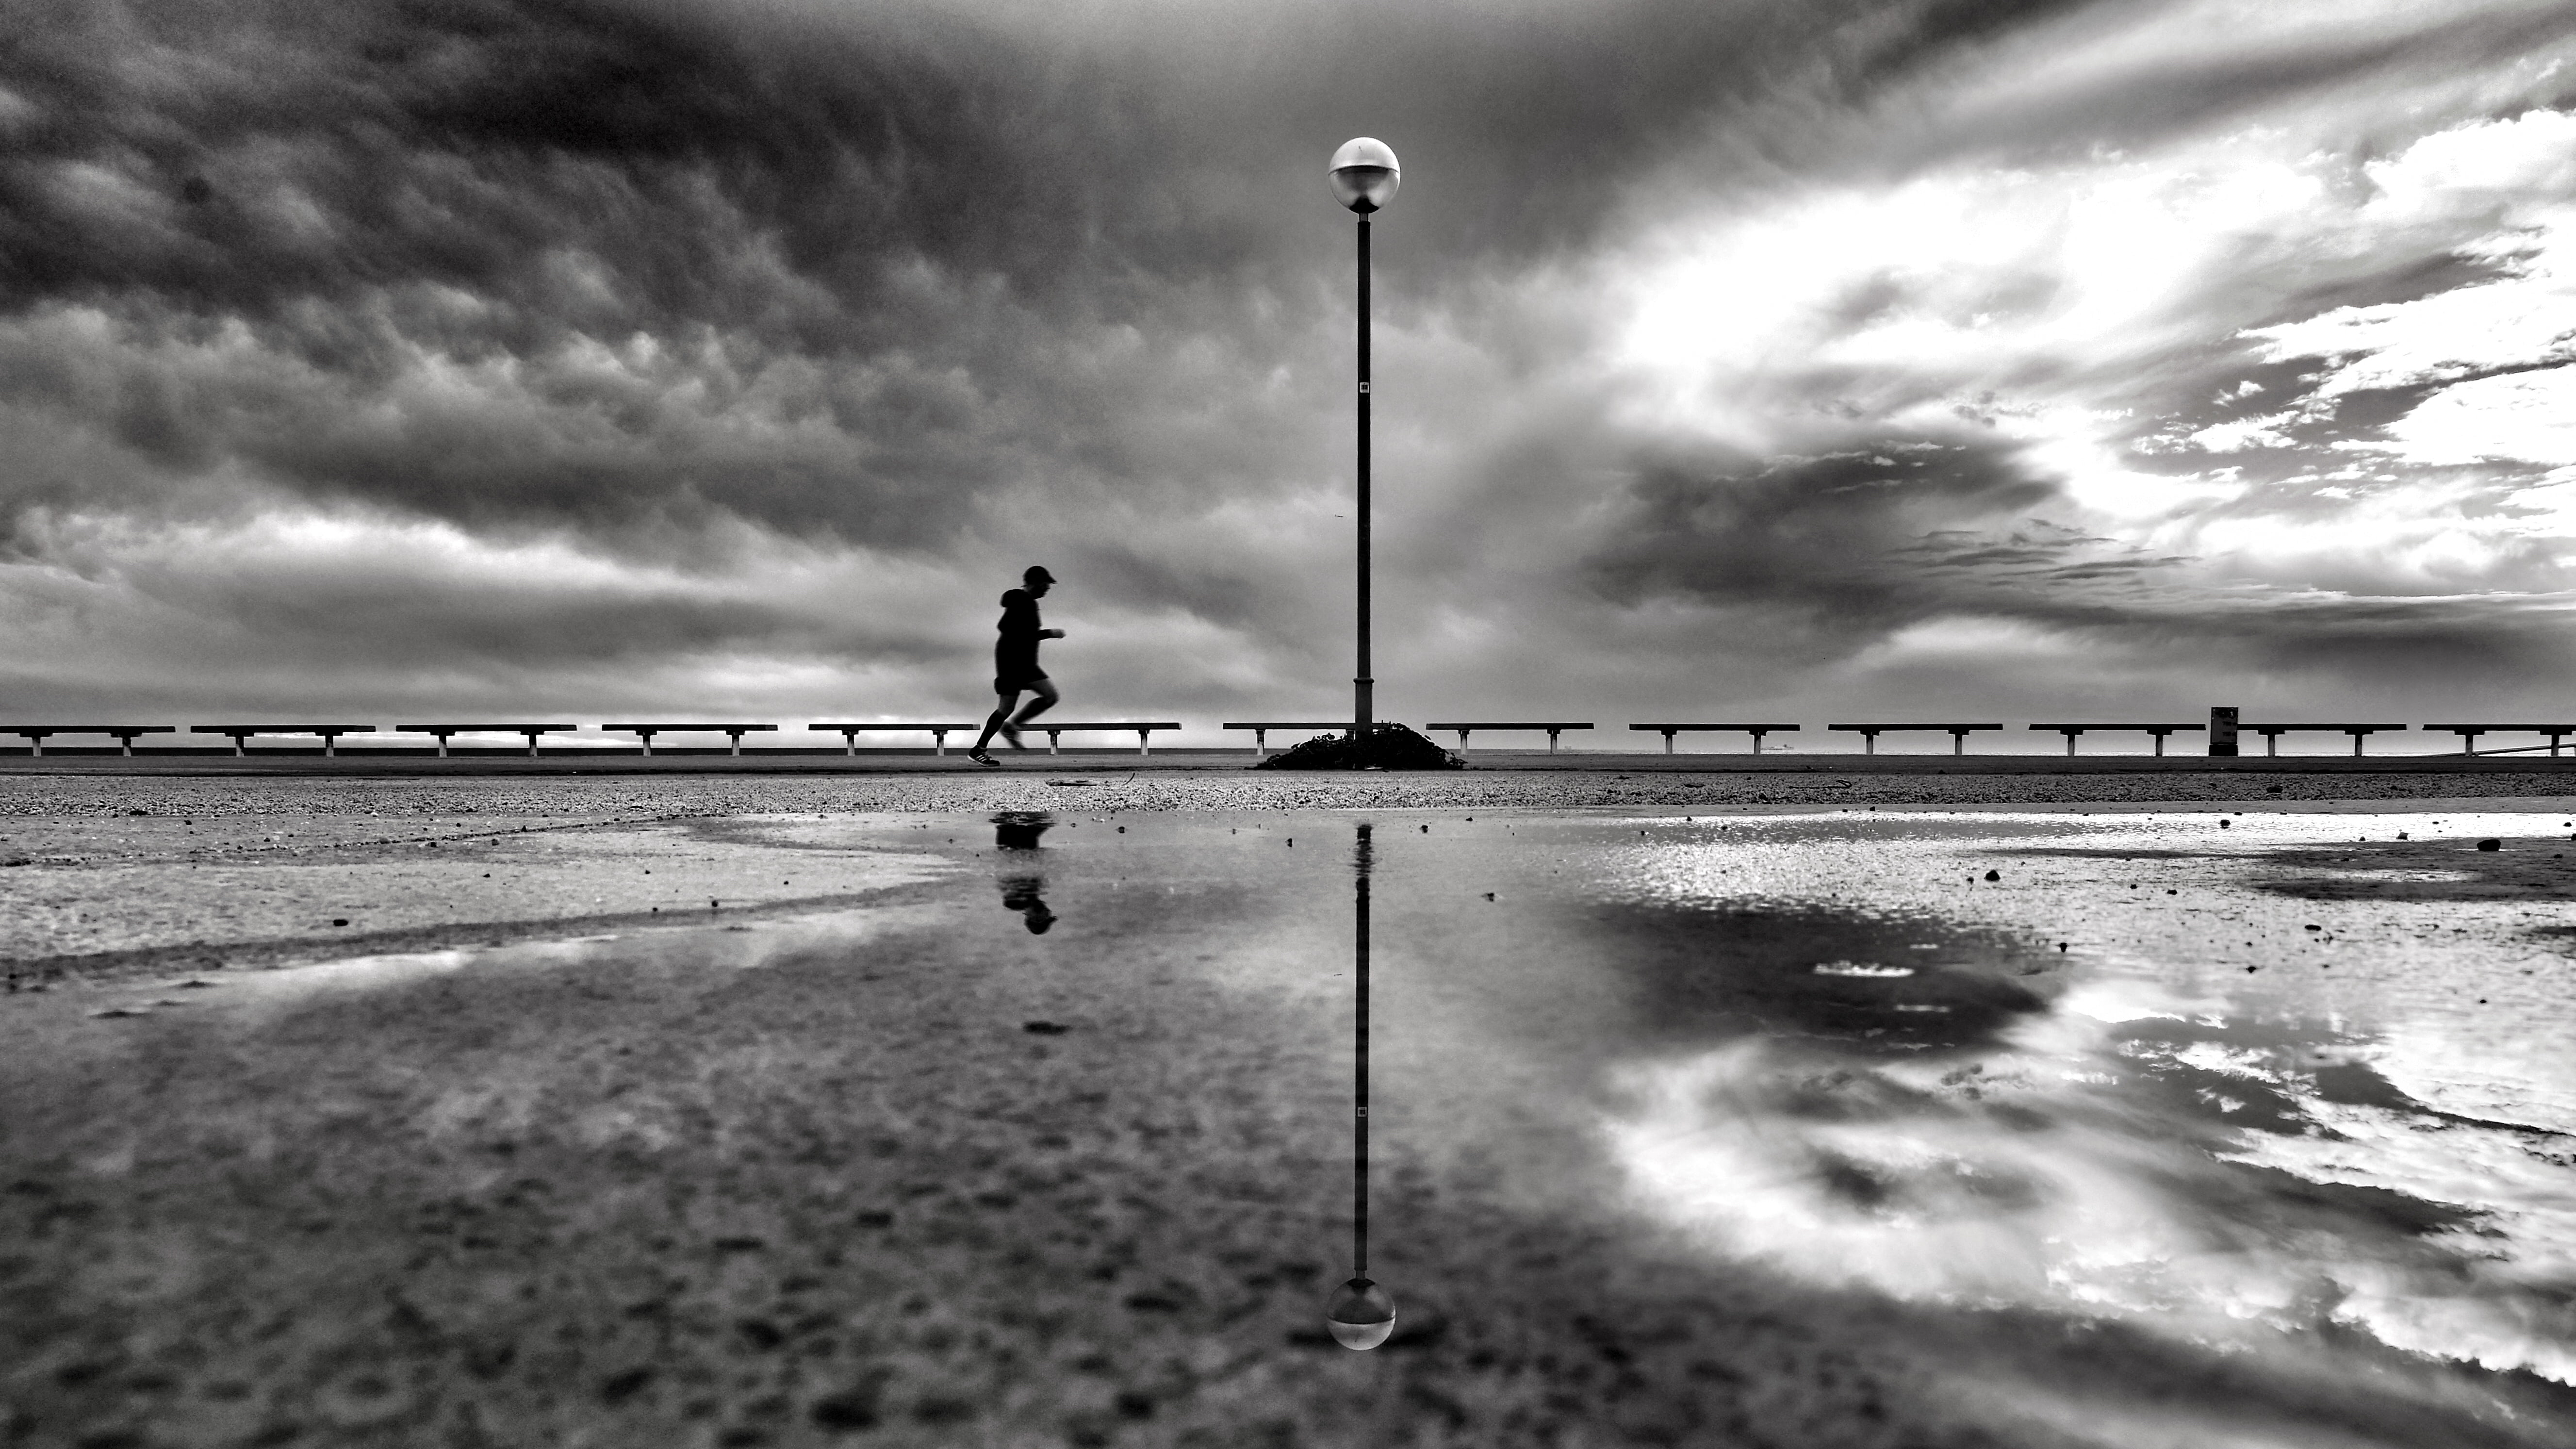 gray scale photo of person jogging near to body of water, morning